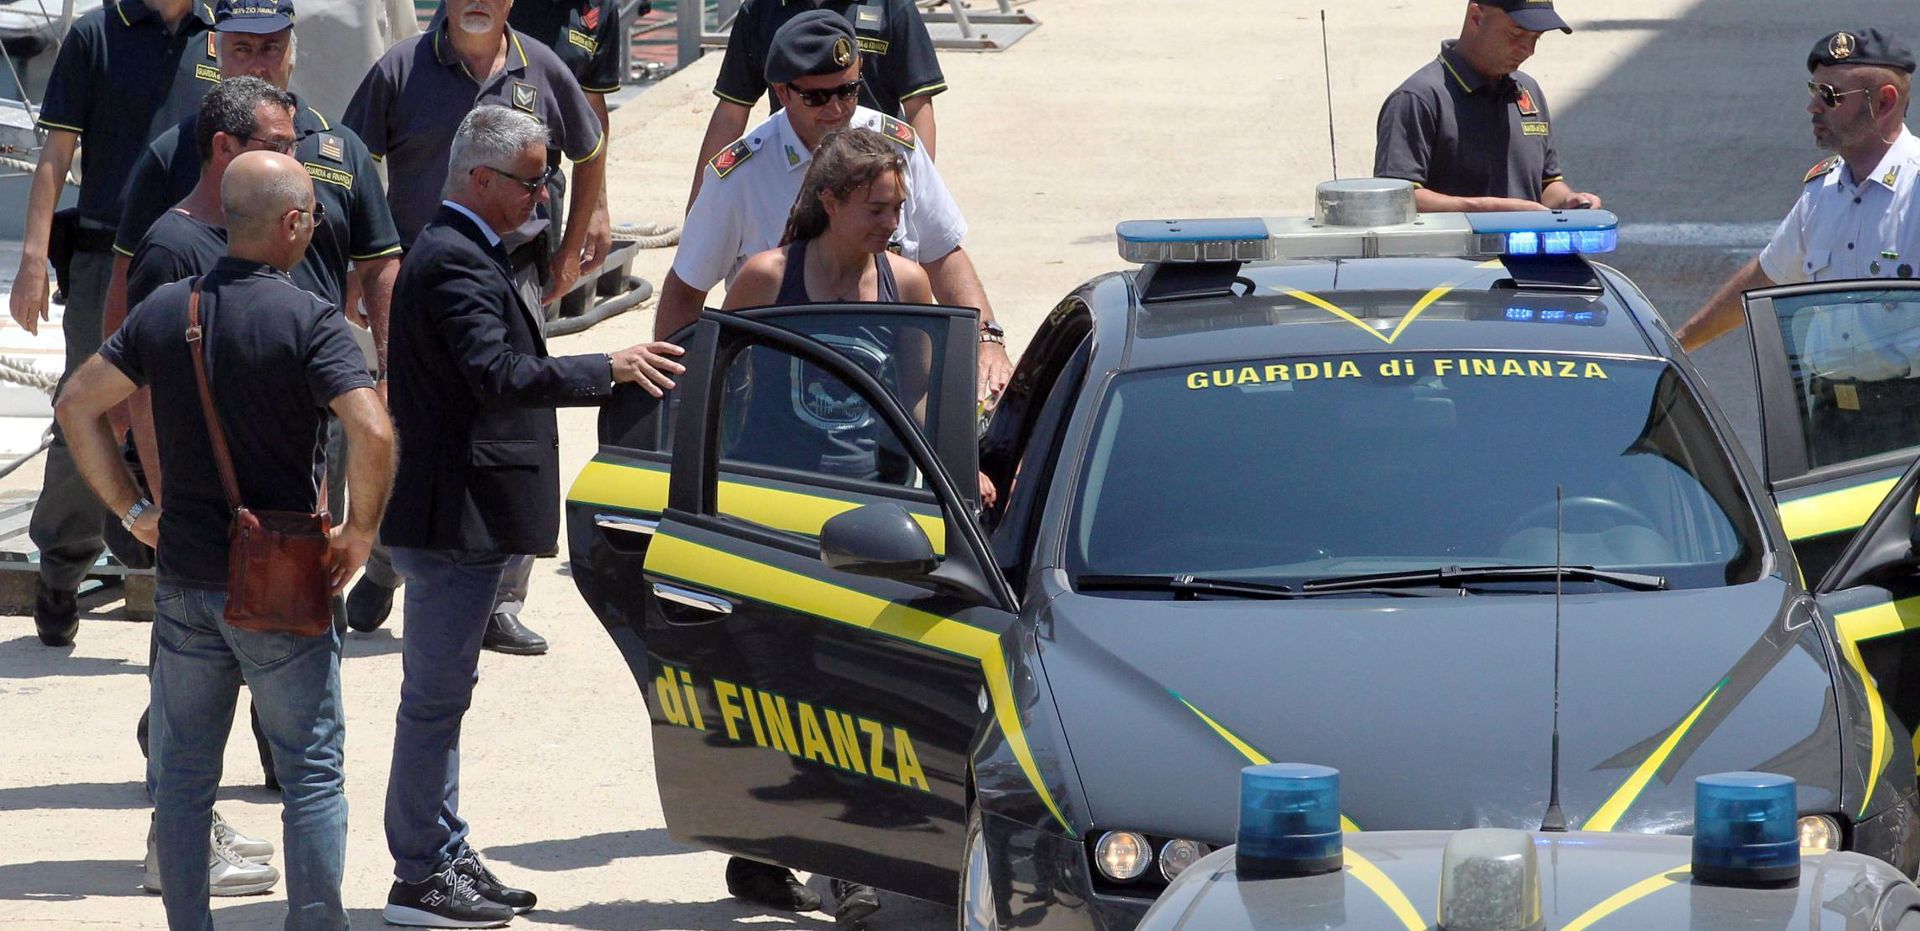 epa07686966 Rescue ship 'Sea-Watch 3' captain Carola Rackete (C), who is being held on charges of abetting immigration and ramming a police cutter, boards a car of the Guardia di Financia upon her arrival at Porto Empedocle, Italy, 01 July 2019. German captain Carola Rackete was arrested on 29 June reportedly after violating orders from the Italian Finance Police and entering the port of Lampedusa while ramming a patrol boat on migrant rescue ship 'Sea-Watch 3'.  EPA/PASQUALE CLAUDIO MONTANA LAMPO